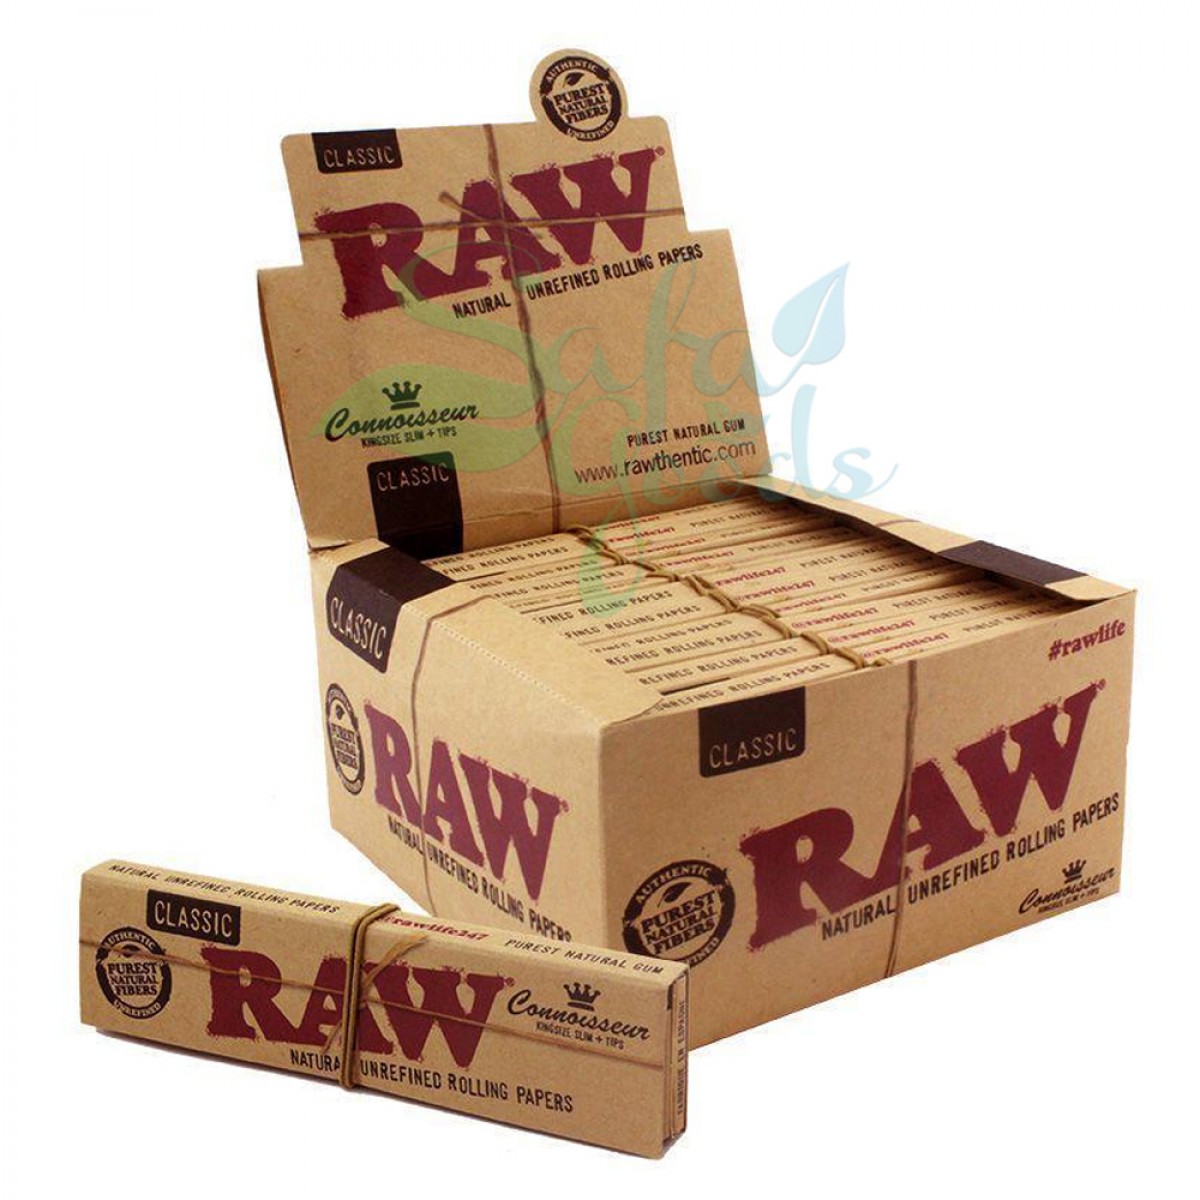 RAW - Classic Connoisseur Rolling Papers - King Size 